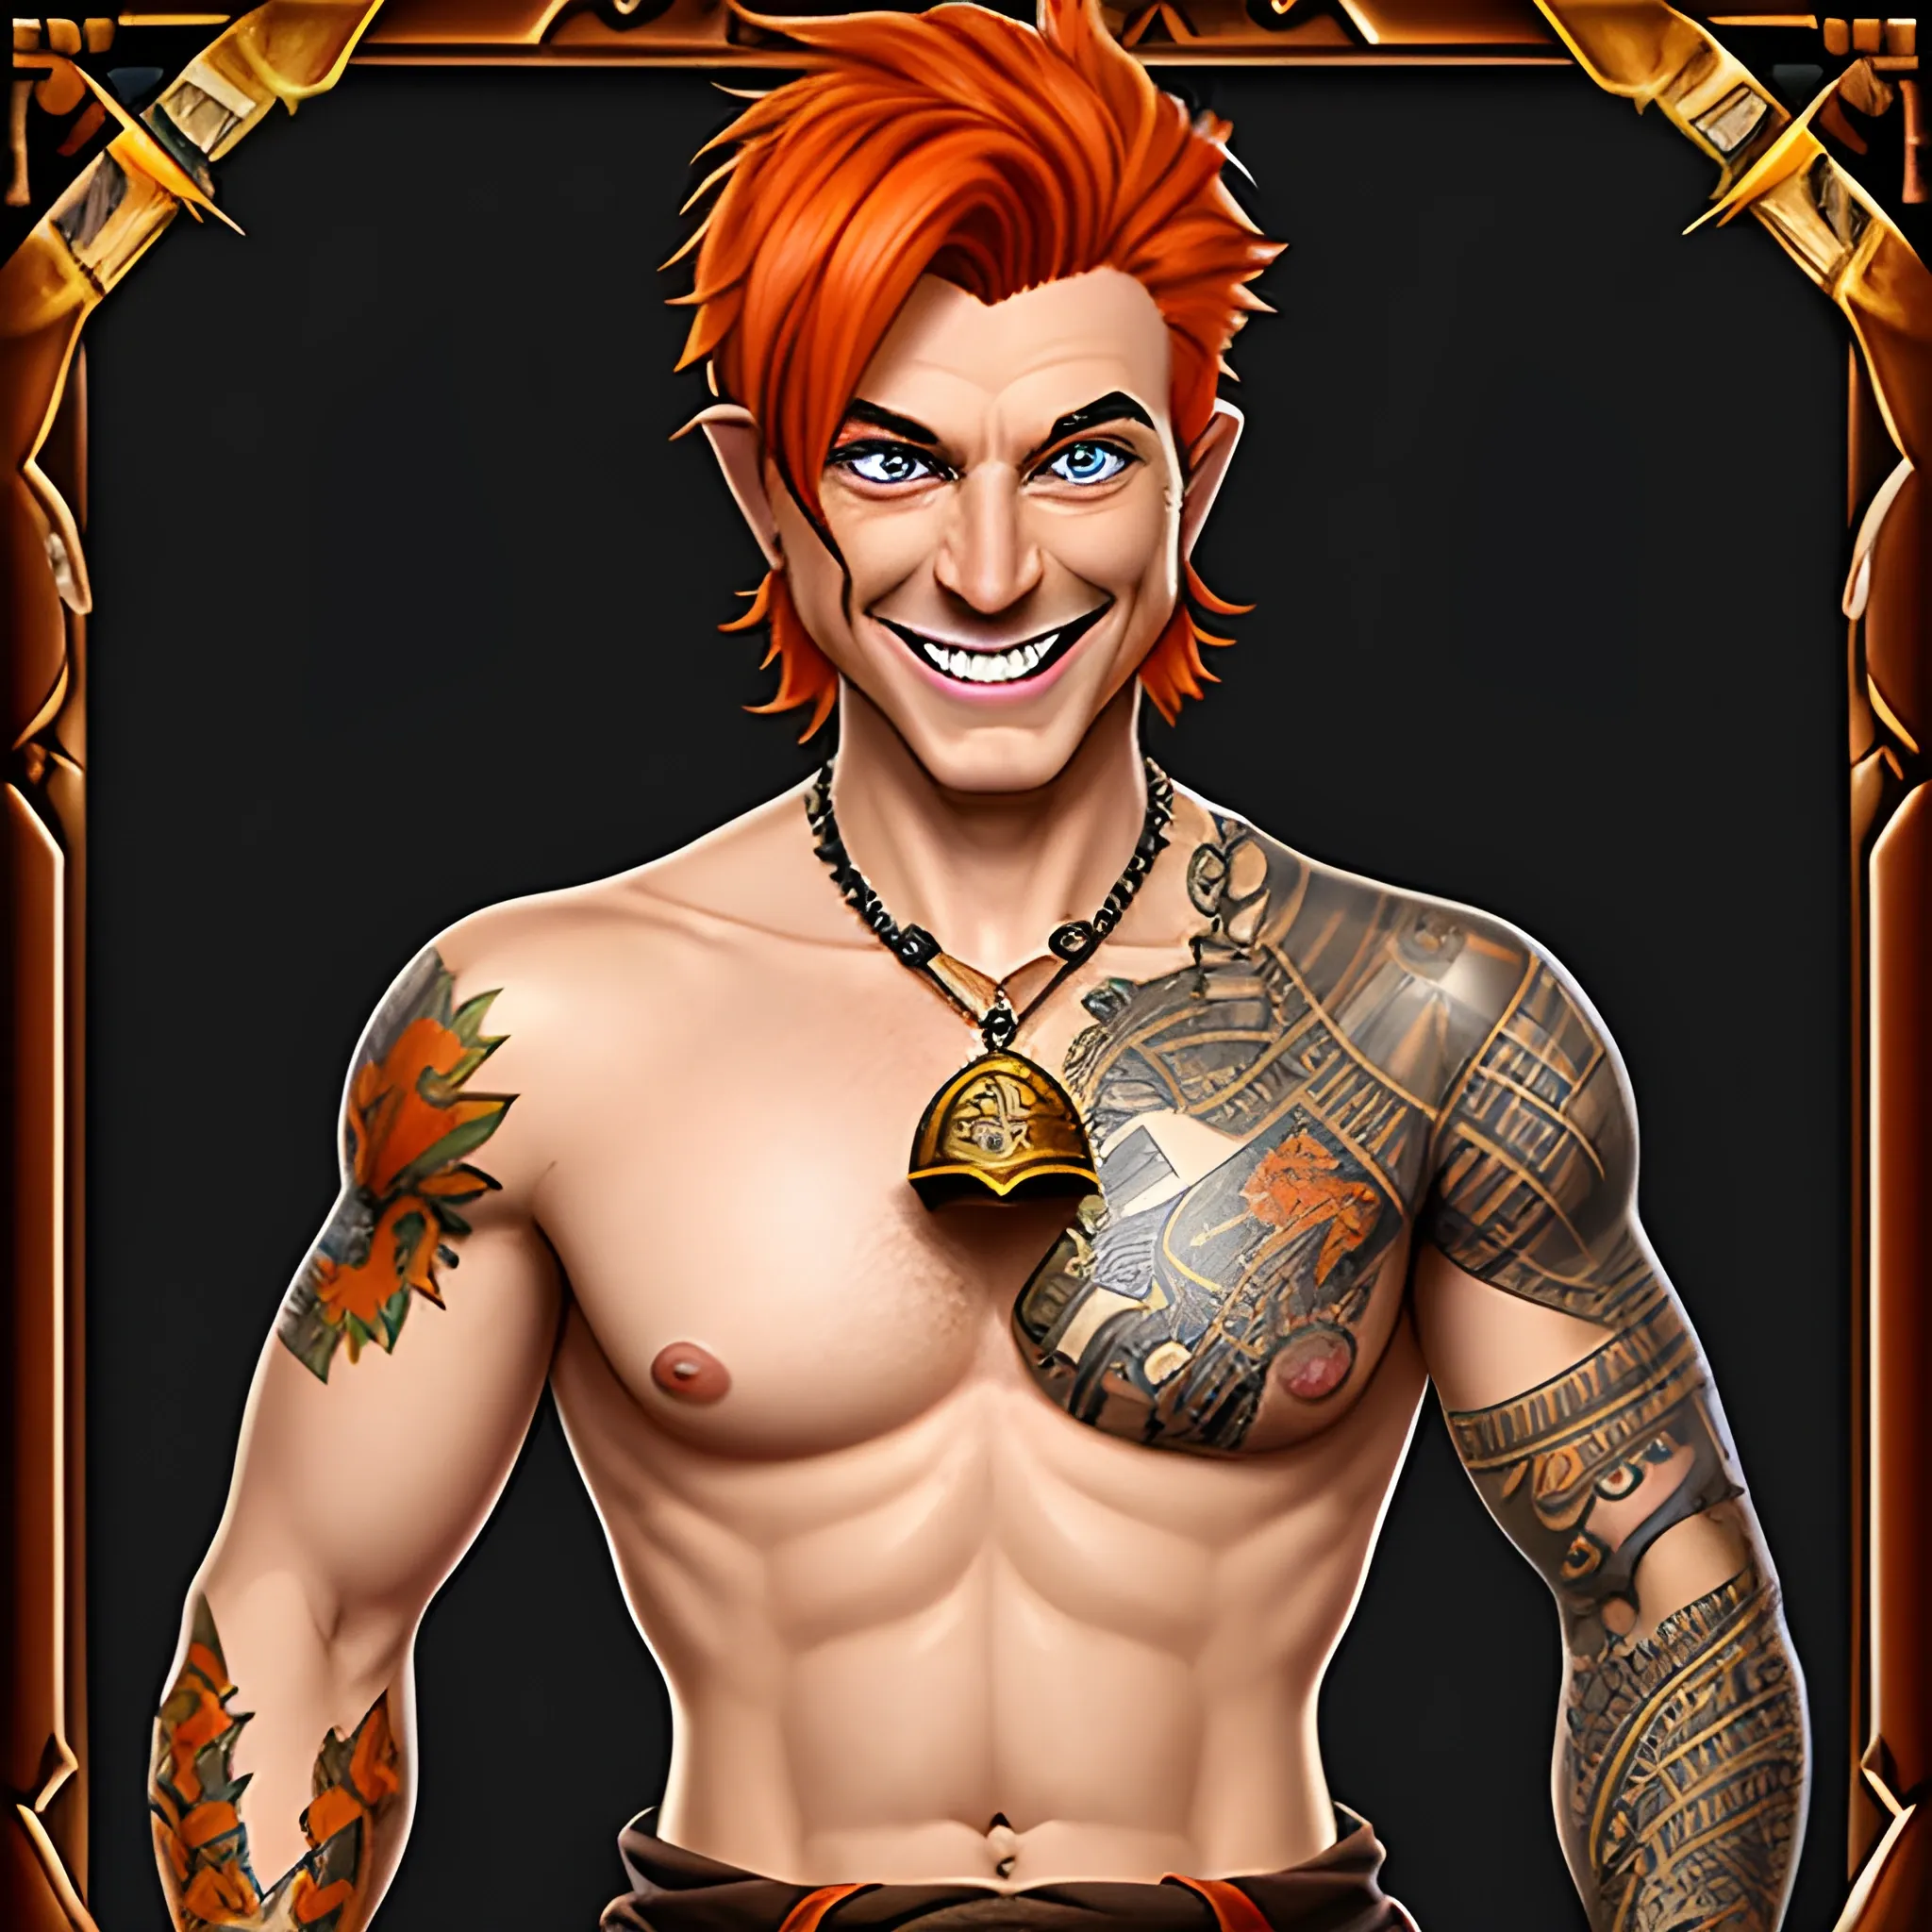 DnD teenage slim build male short haired halfling dark orange ginger with a perilla chest treasure map tatoo smiling with a mugshot expression and playing a small drum 